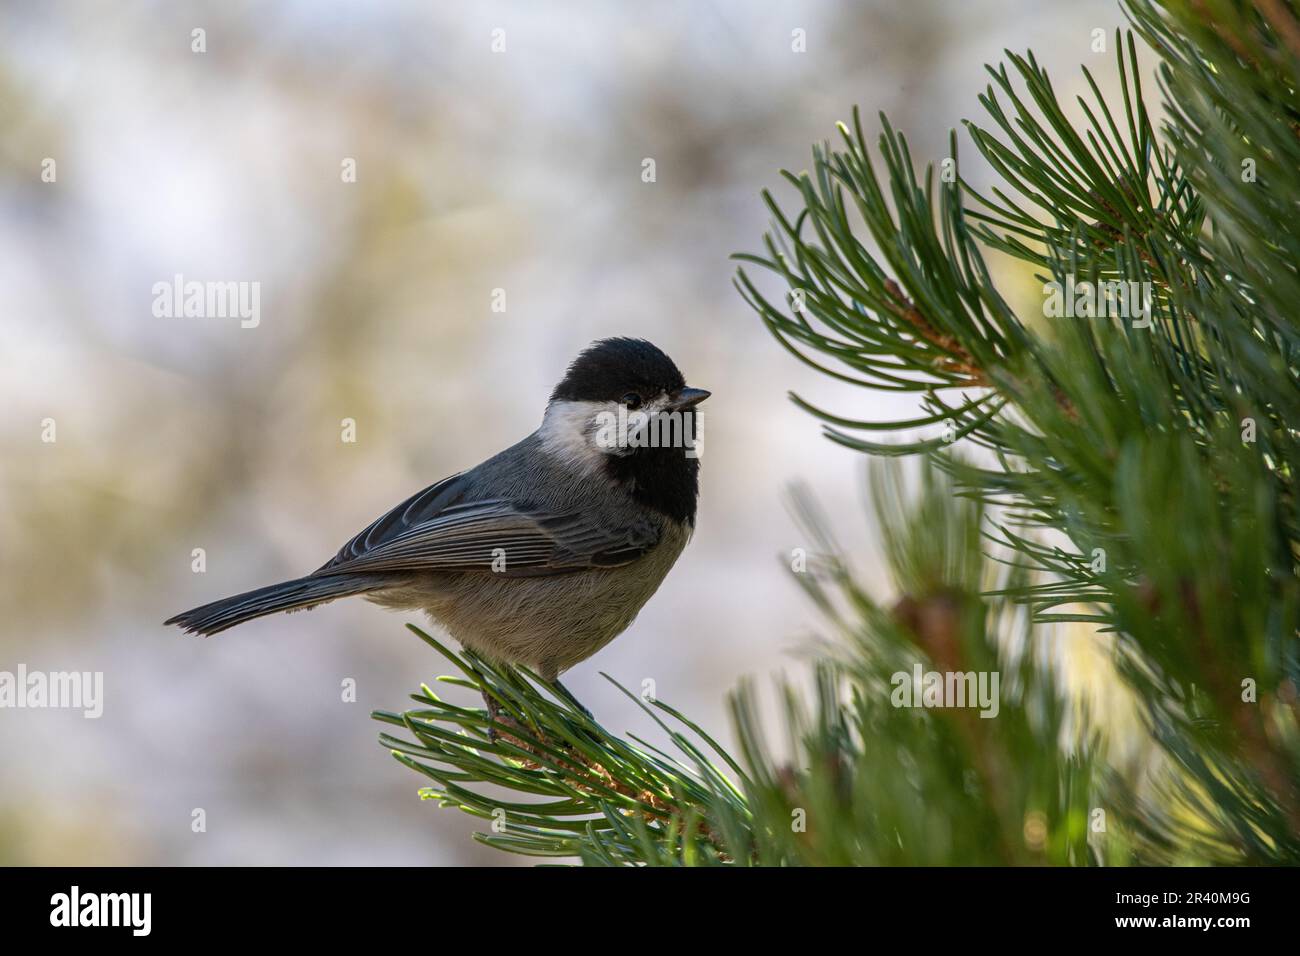 Mexican chickadee sitting on a pine tree Stock Photo